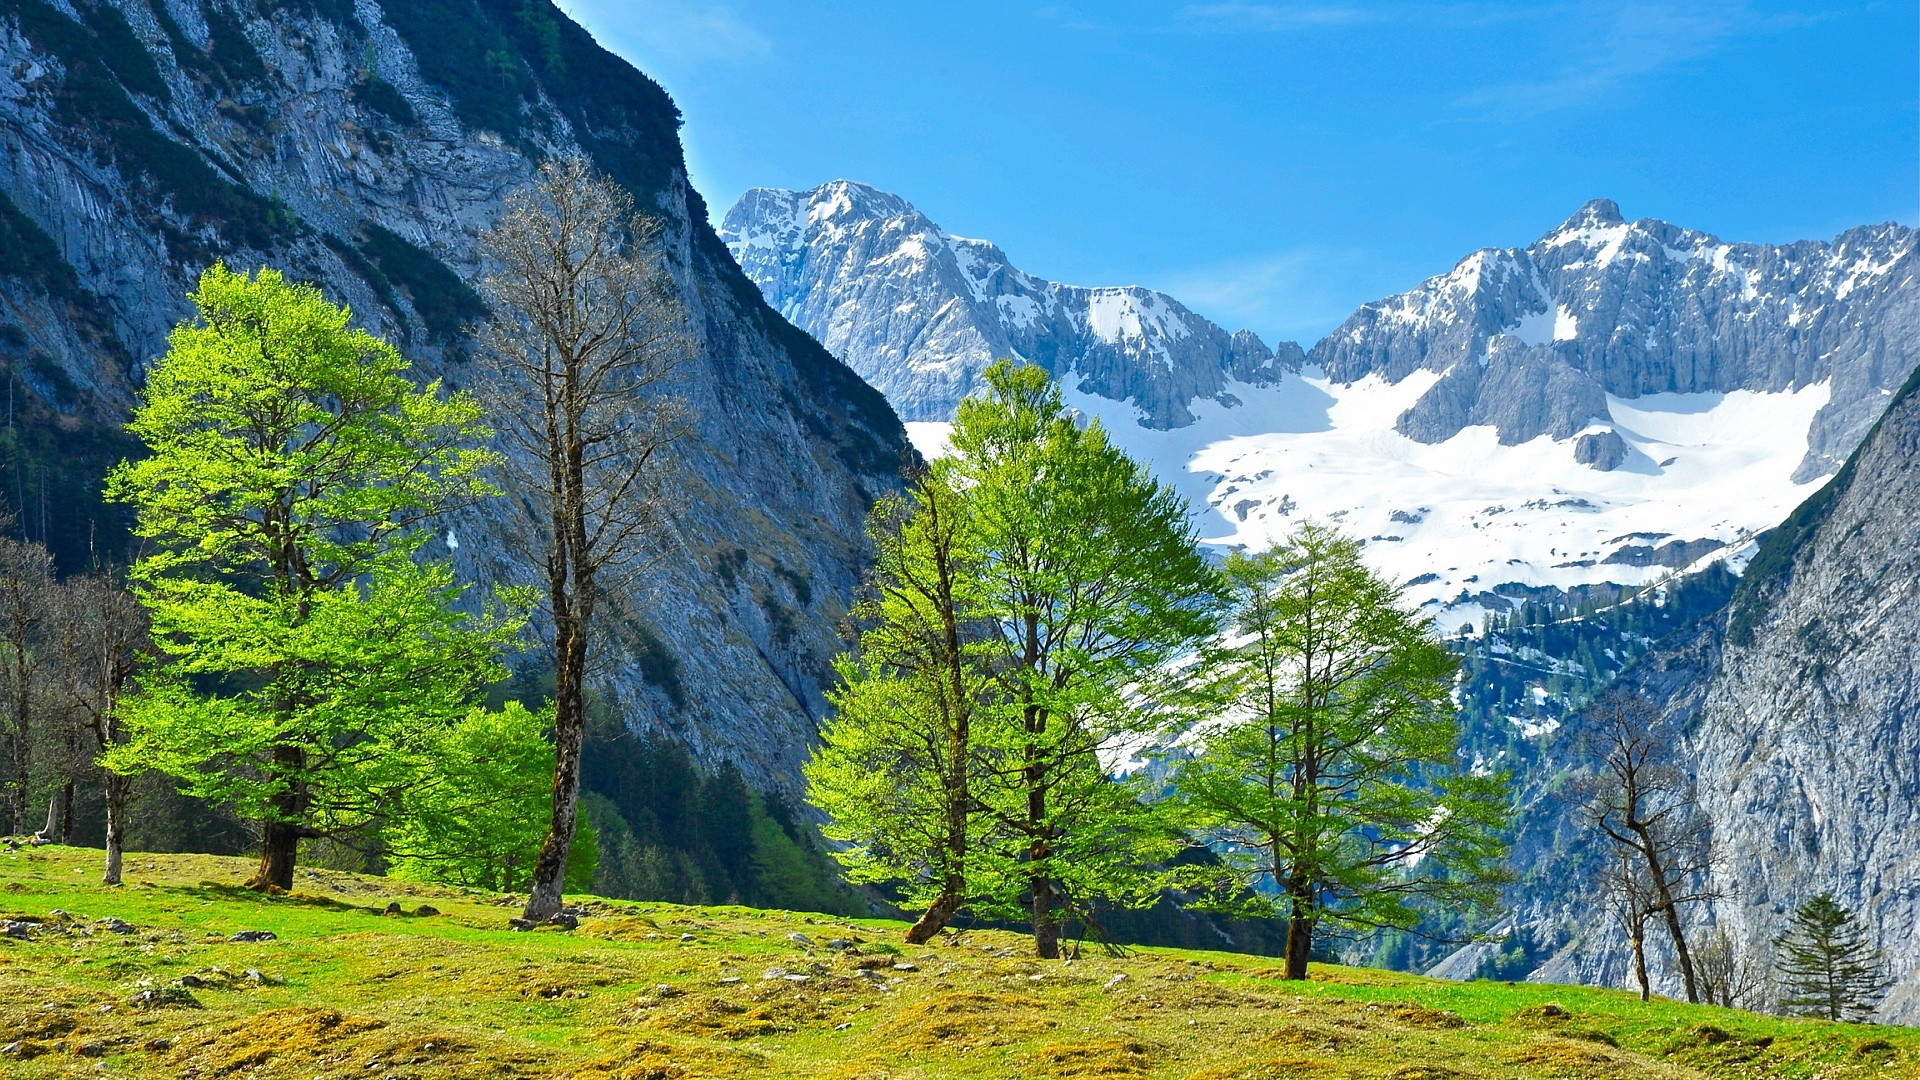 General 1920x1080 landscape nature Alps trees mountains outdoors